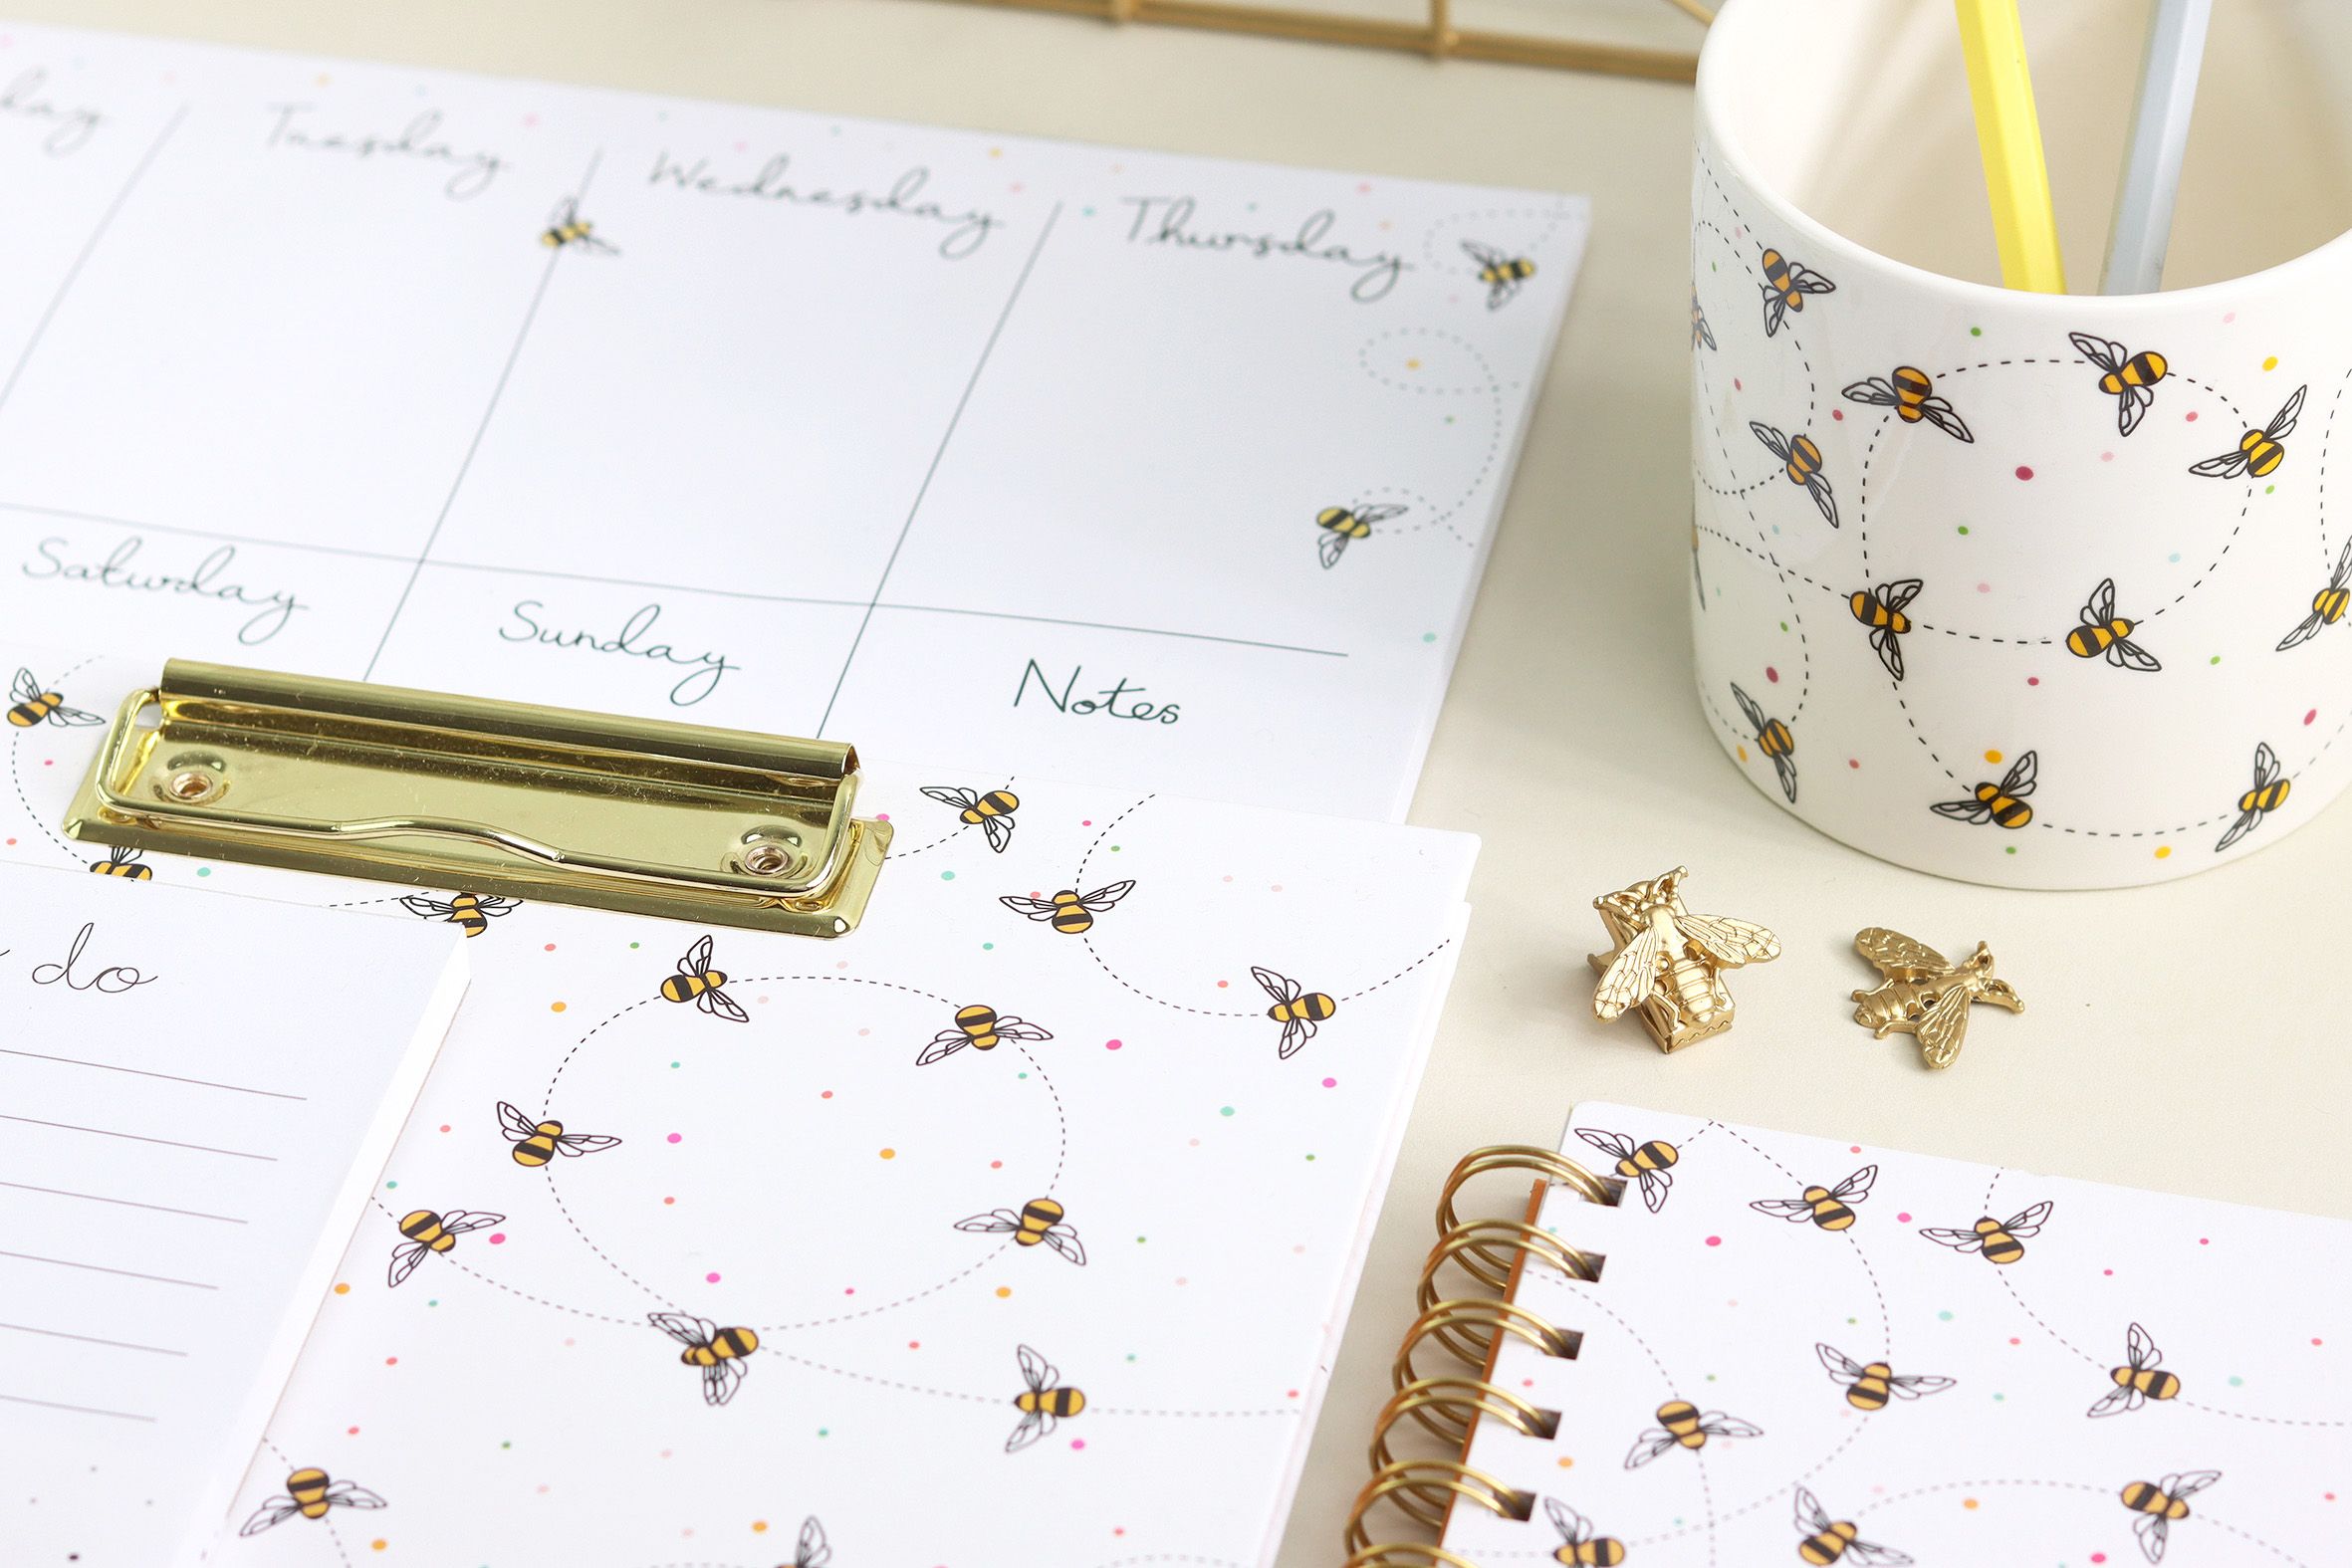 Gorgeous new giftware and stationery!